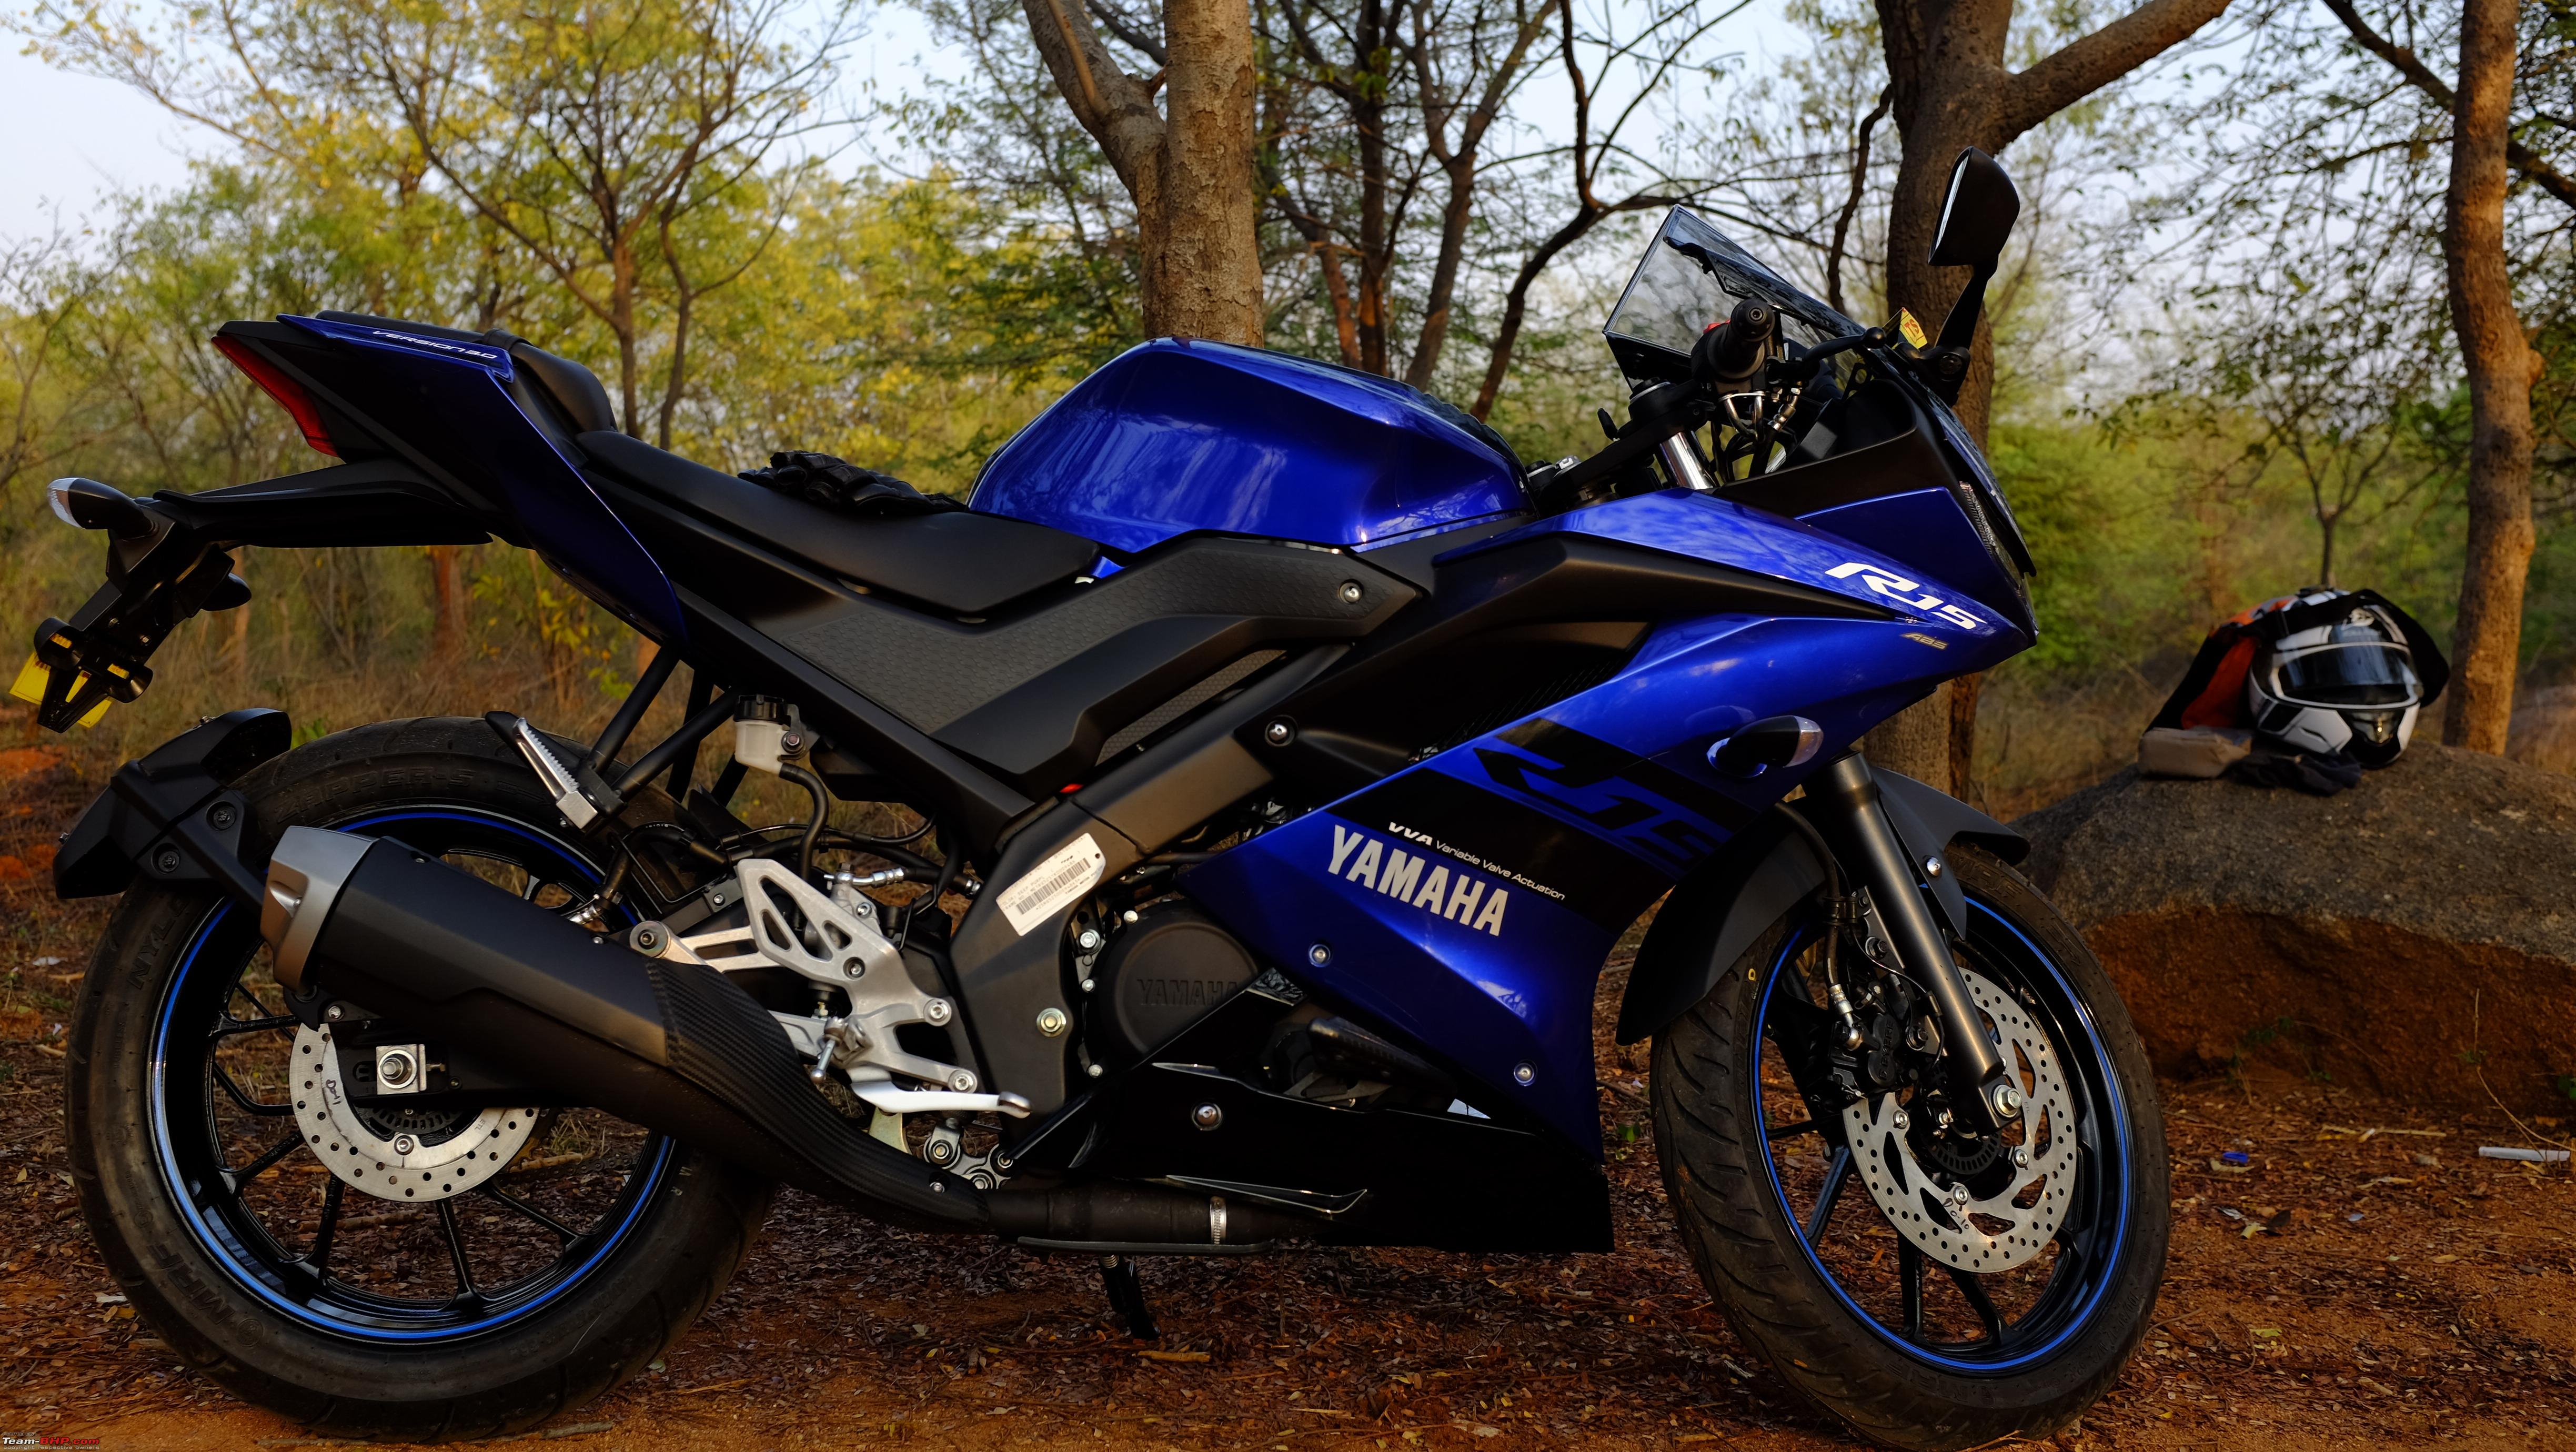 R15 V3 Background Phtots / Download Yamaha R15 V3 Price In India Png Image With No Background ...